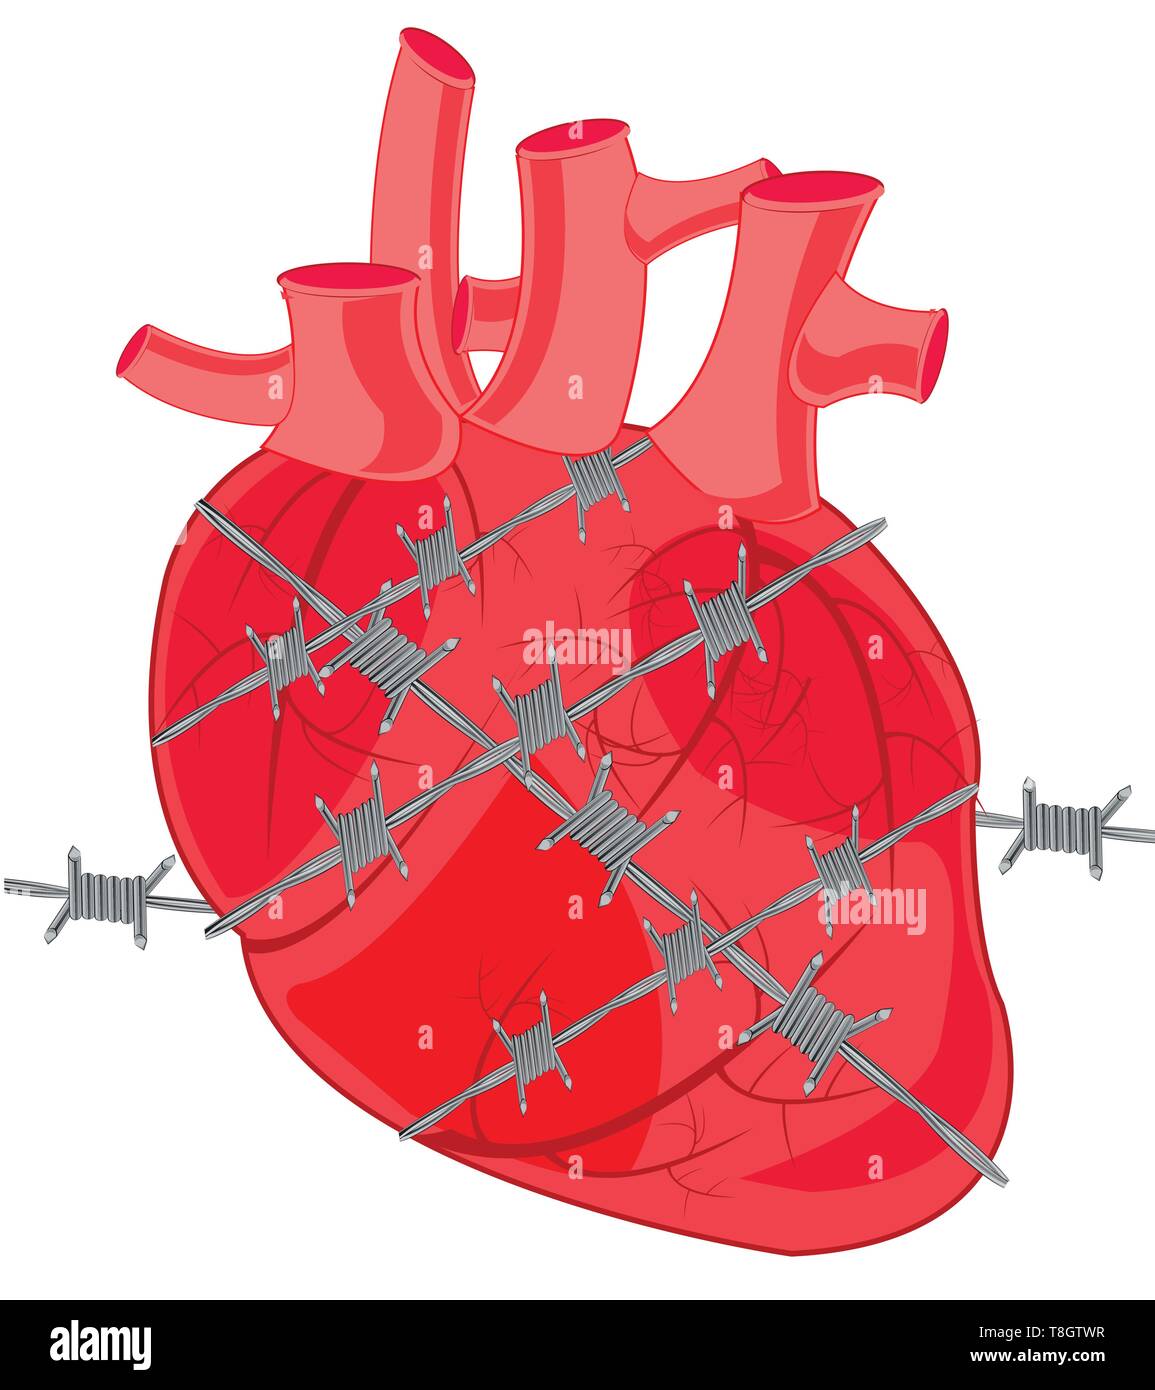 Heart of the person tangled in barbed wire Stock Vector